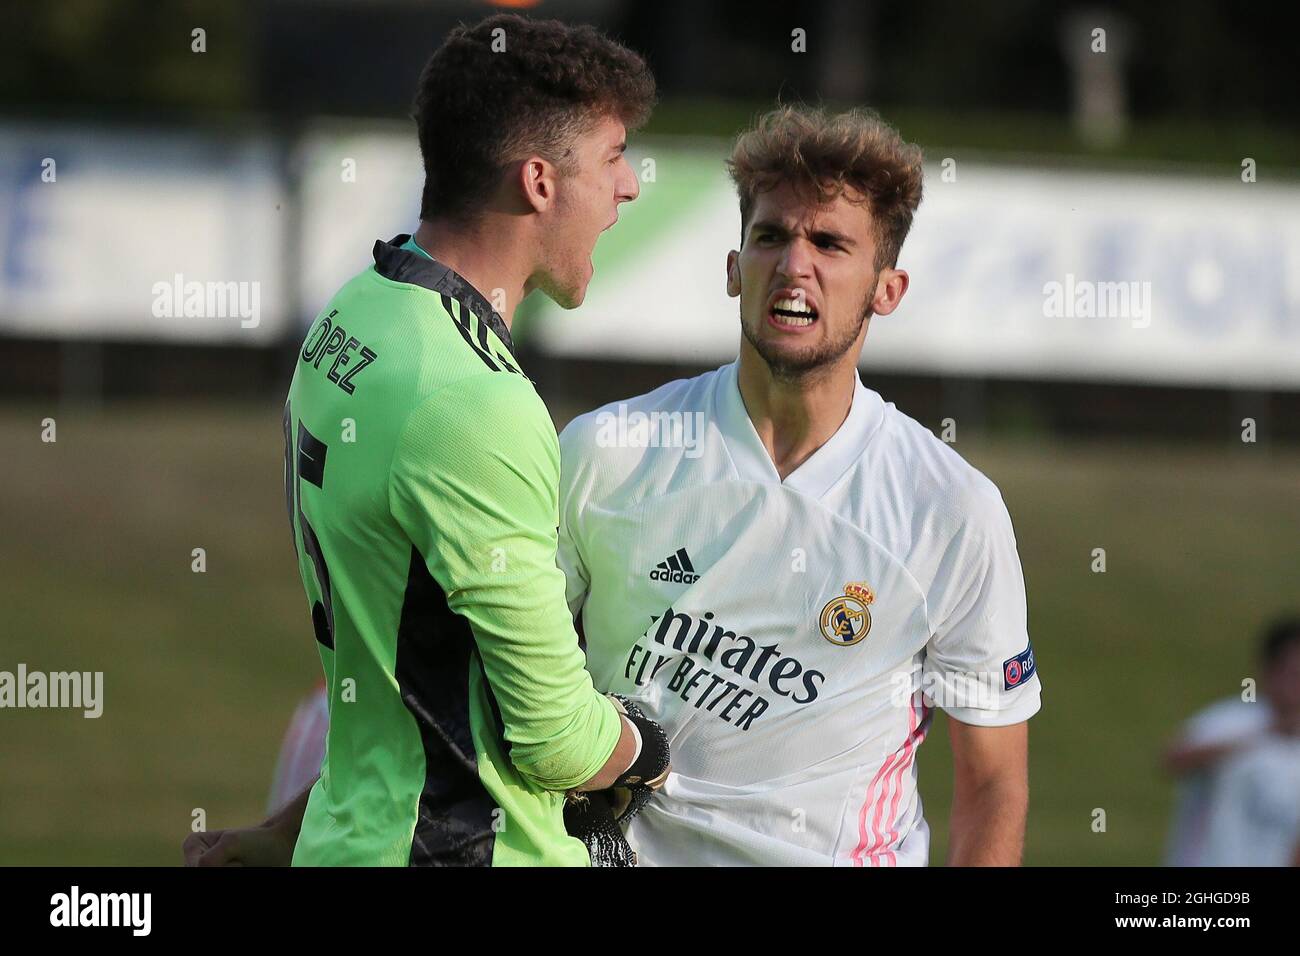 Luis Lopez of Real Madrid celebrates with team mate Pablo Ramon after saving a second half penalty from Tiago Dantas of Benfica during the UEFA Youth League match at Colovray Sports Centre, Nyon. Picture date: 25th August 2020. Picture credit should read: Jonathan Moscrop/Sportimage via PA Images Stock Photo